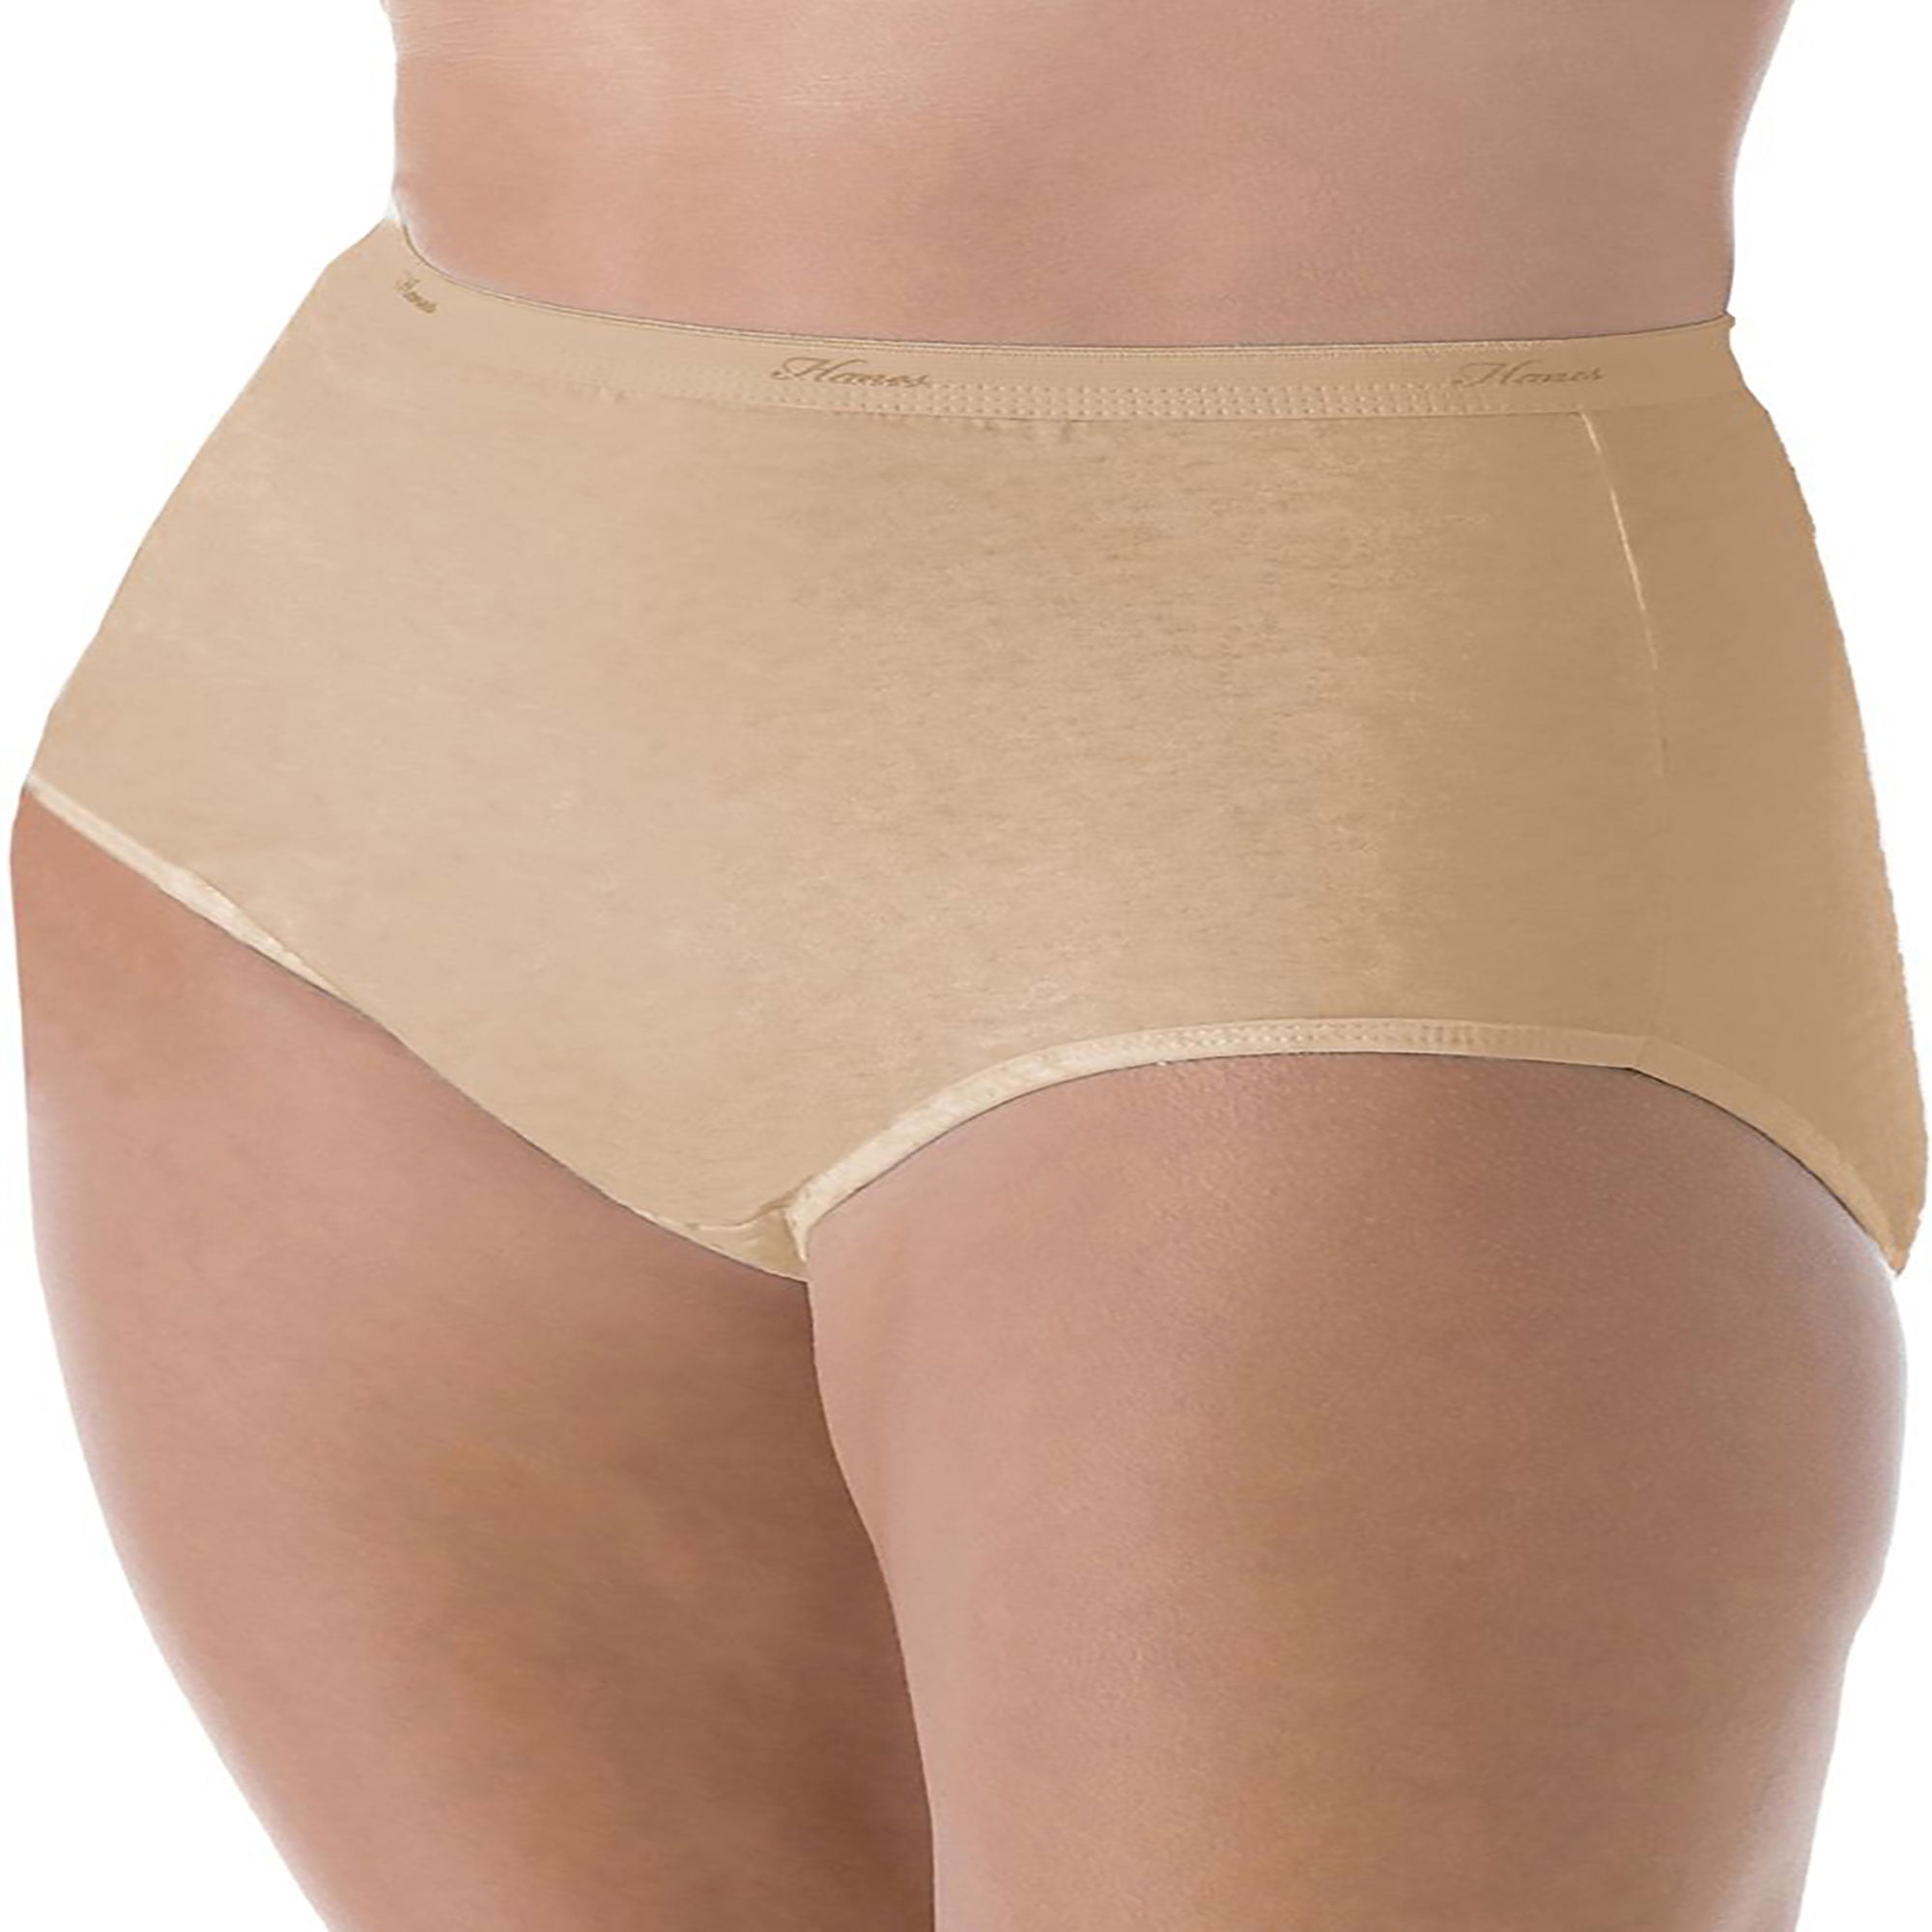 Buy Hanes Women's Cotton Low-Rise Panties Pack, Briefs, No Ride-Up